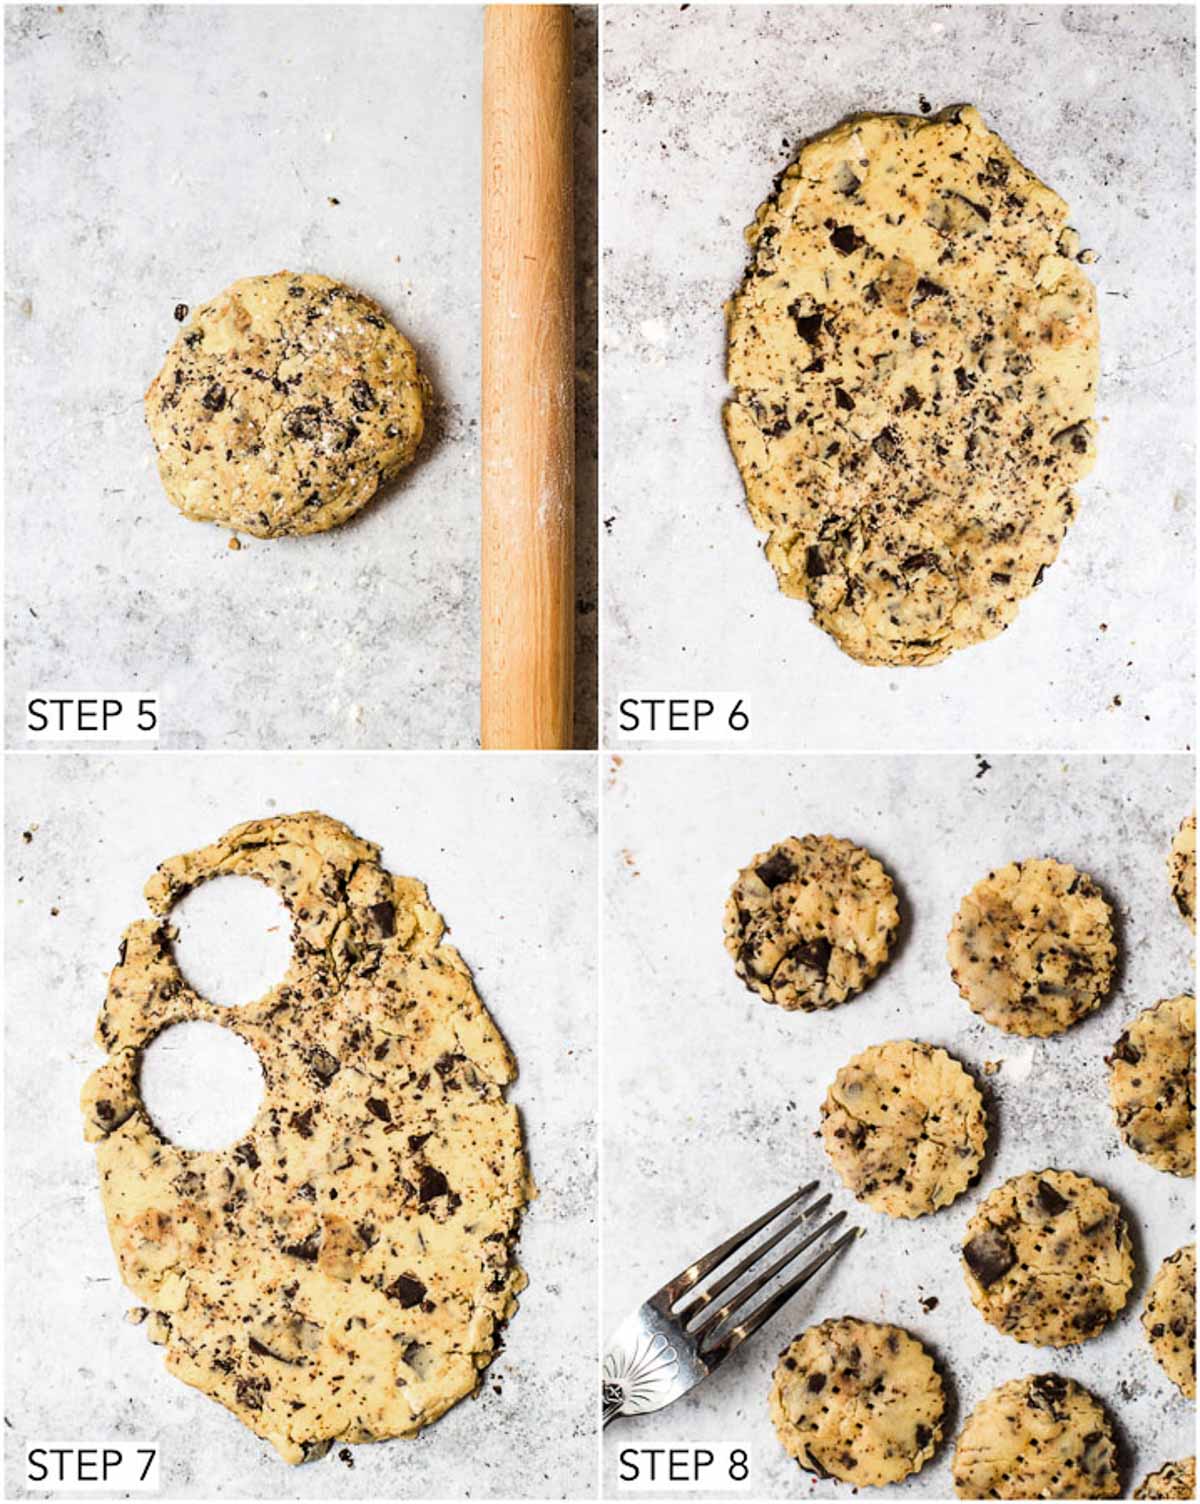 The last four steps in the process of making vegan shortbread.